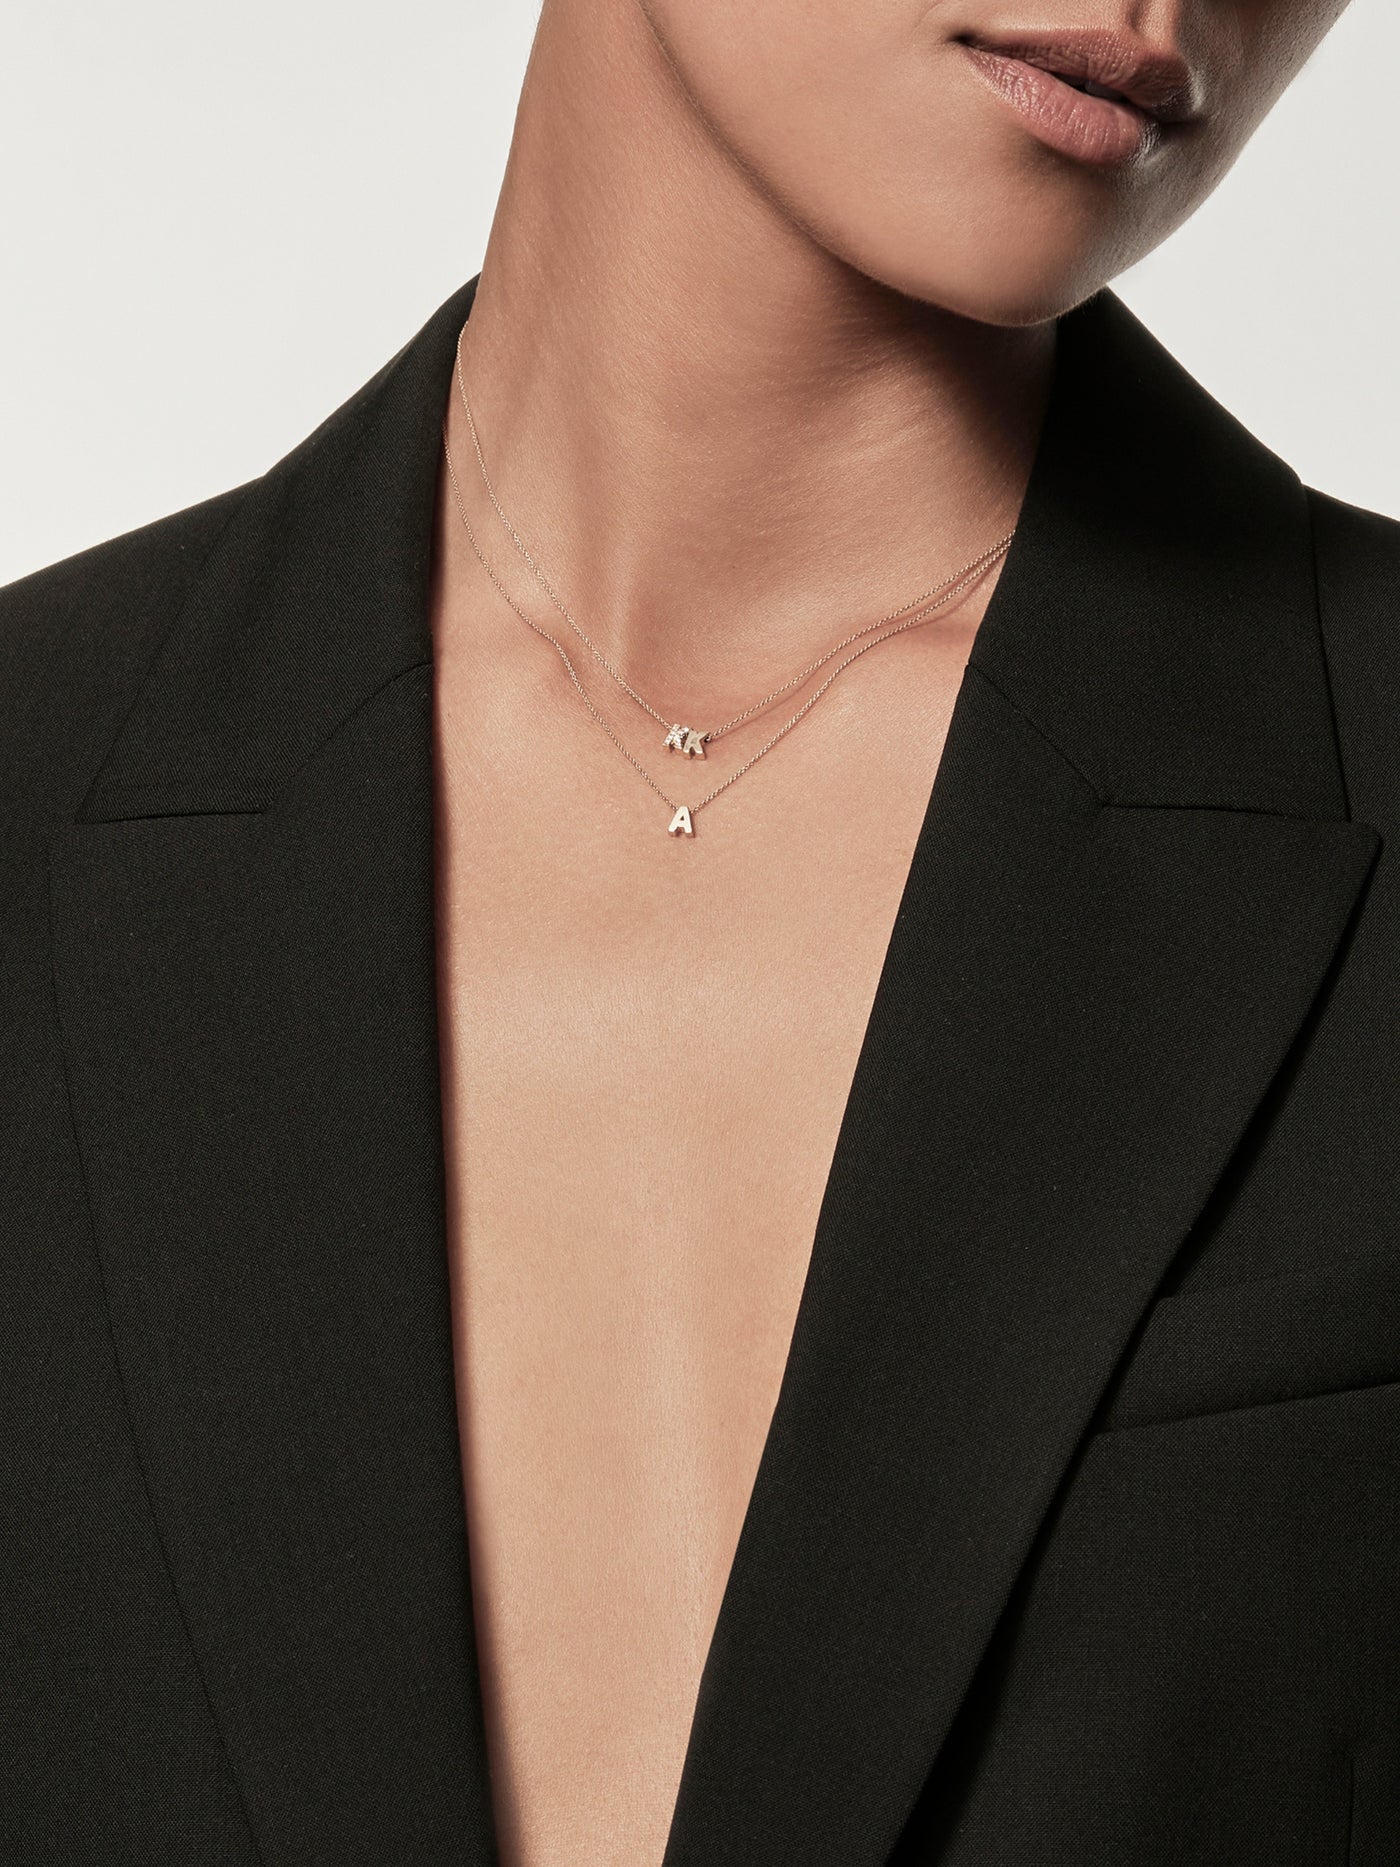 Close-up of a woman wearing a black blazer and a delicate necklace with gold miniature letter pendants.